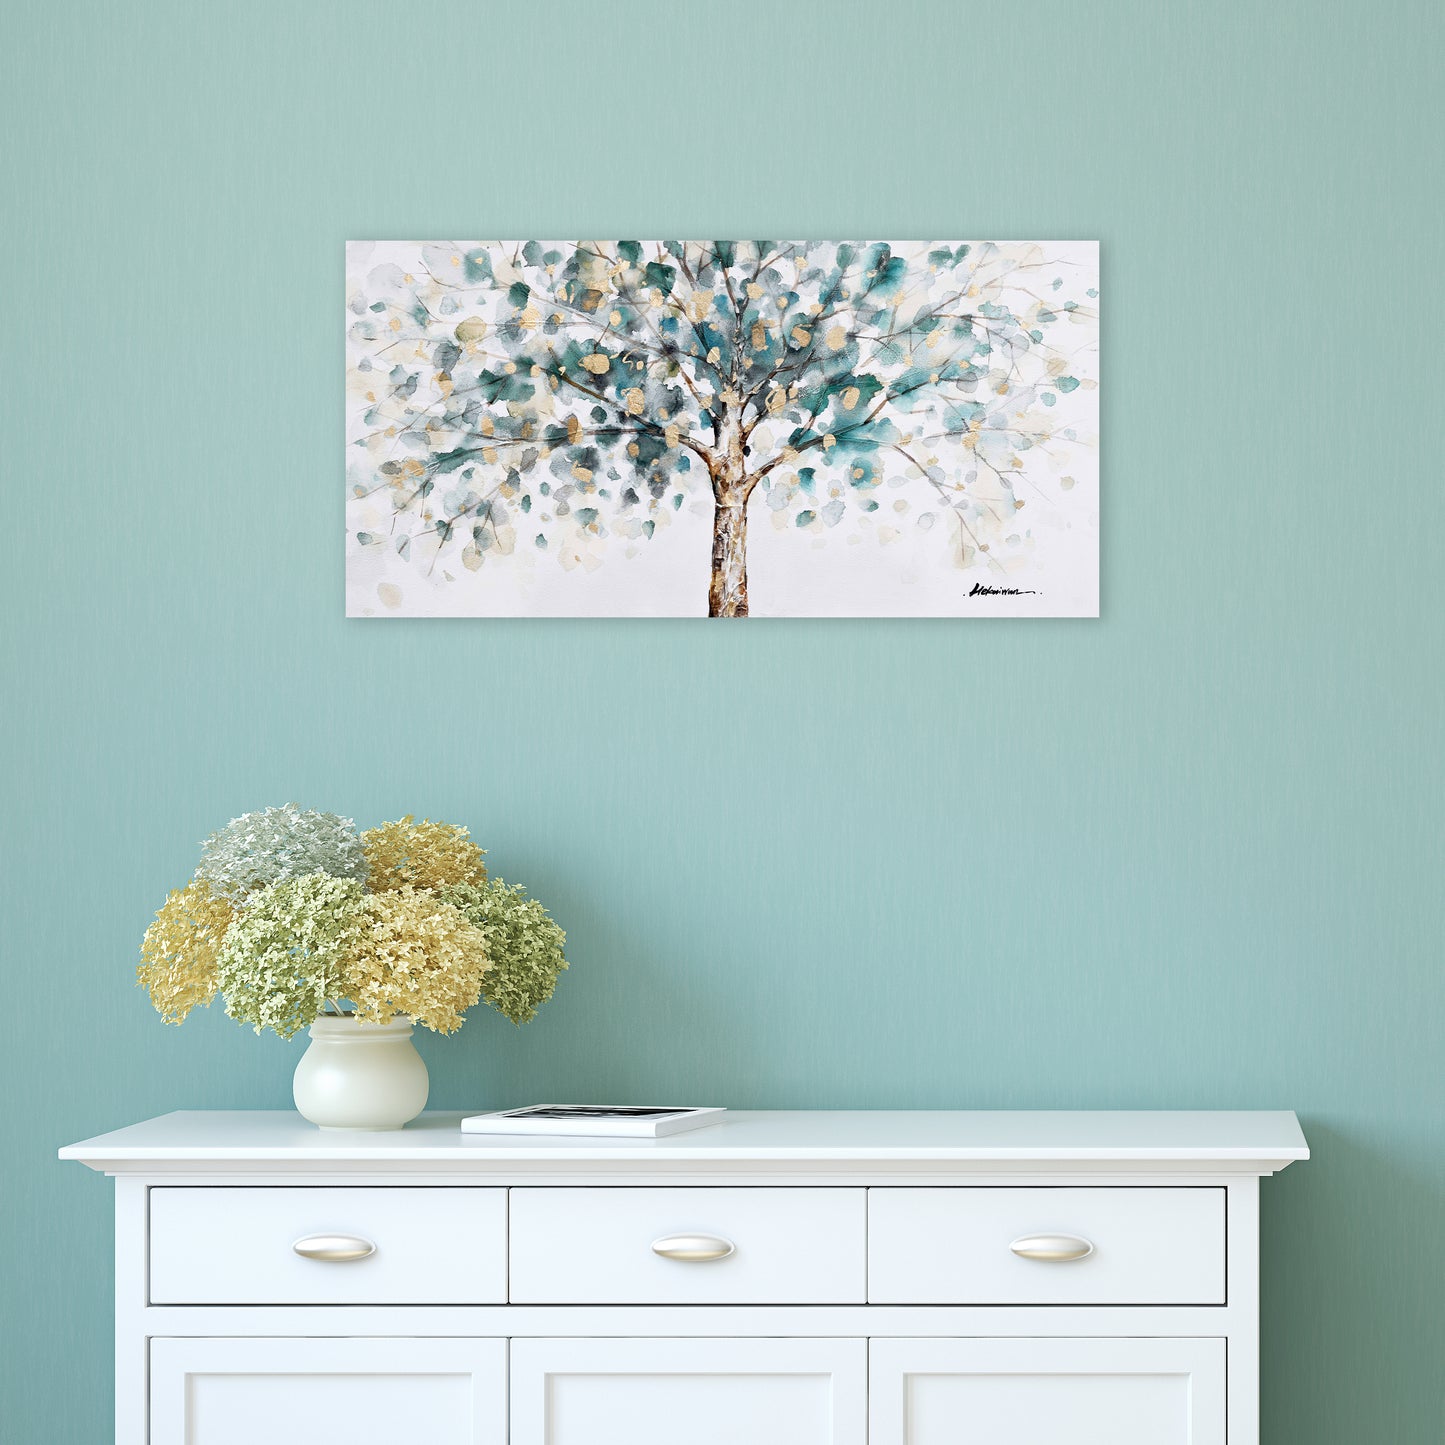 Wrapped Canvas "Golden Tree" Oil Painting. Canvas wall artwork for living room, bedroom, office